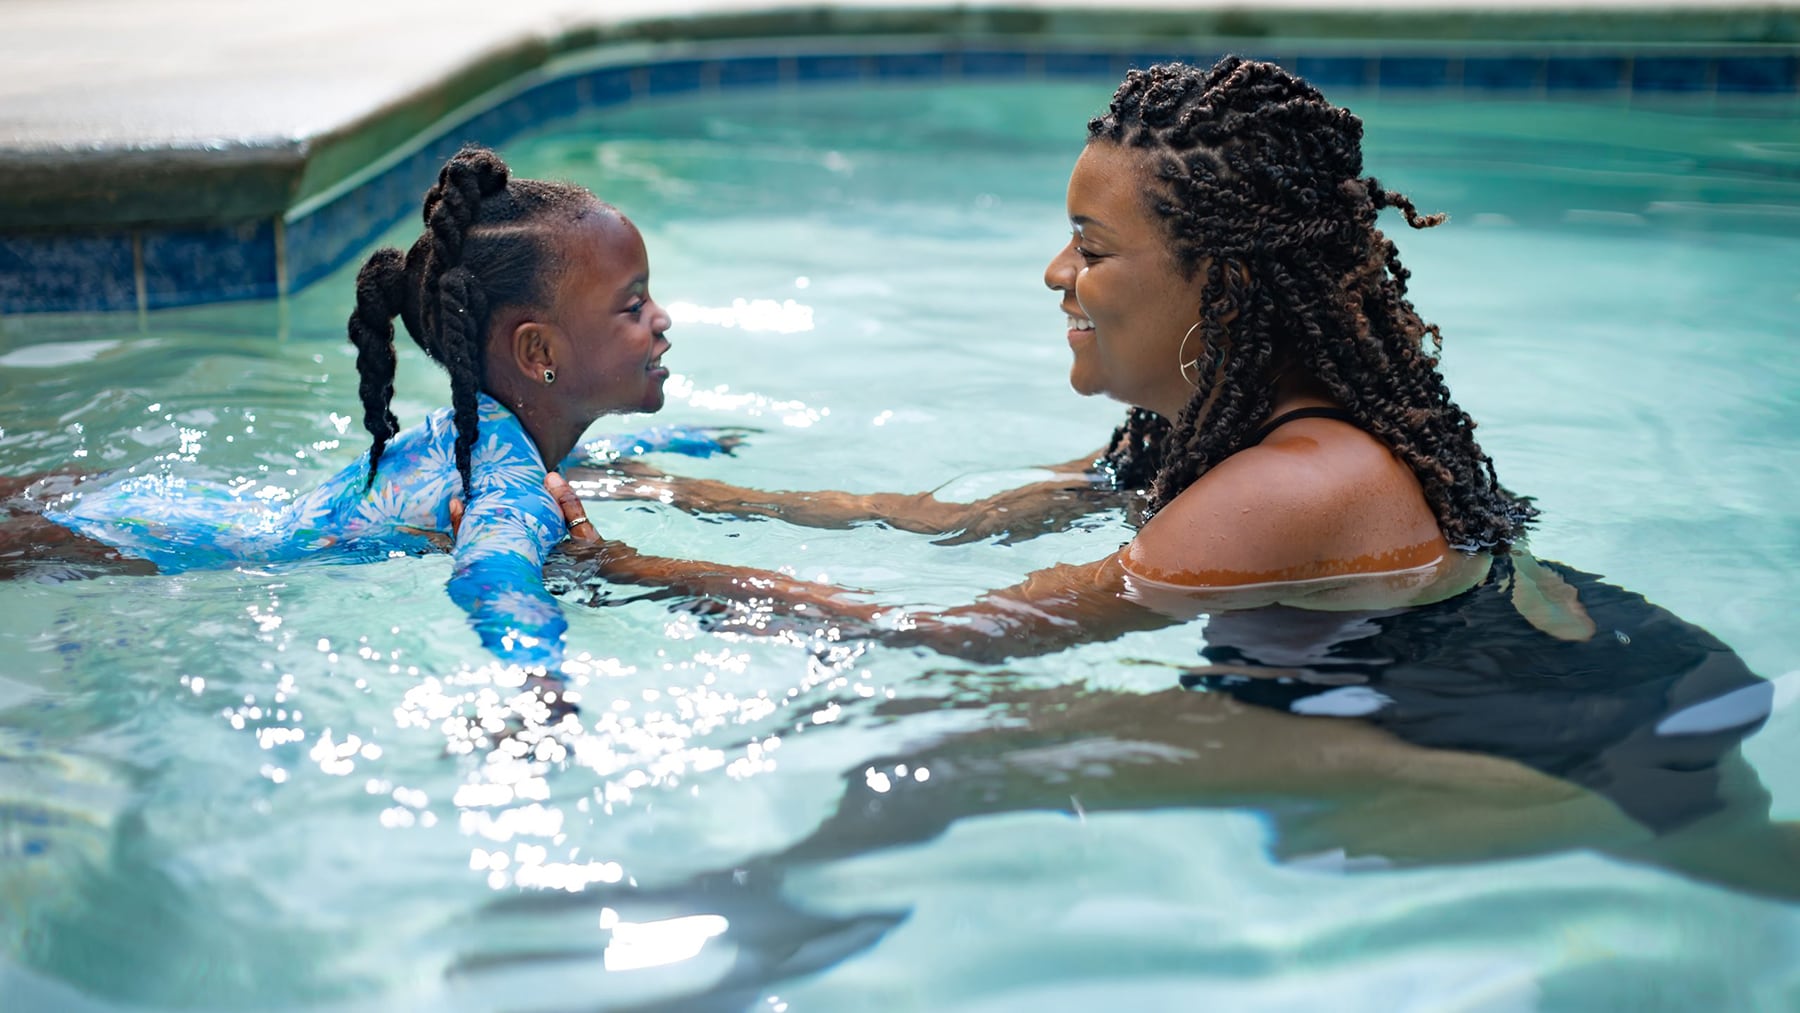 Swim lessons with Black mom and daughter in pool.